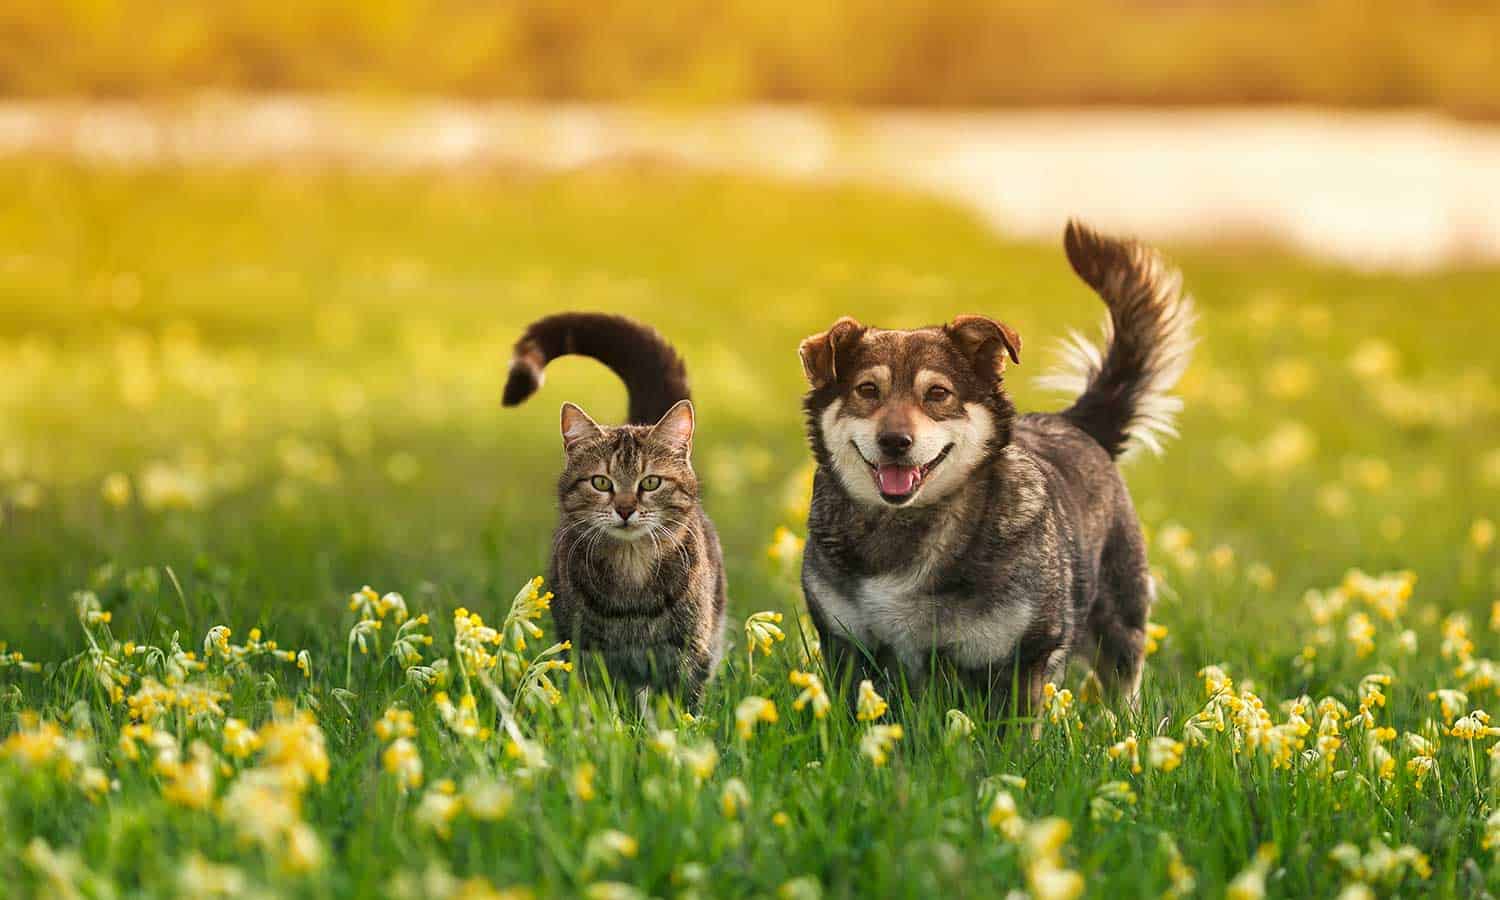 Dog and cat in a field